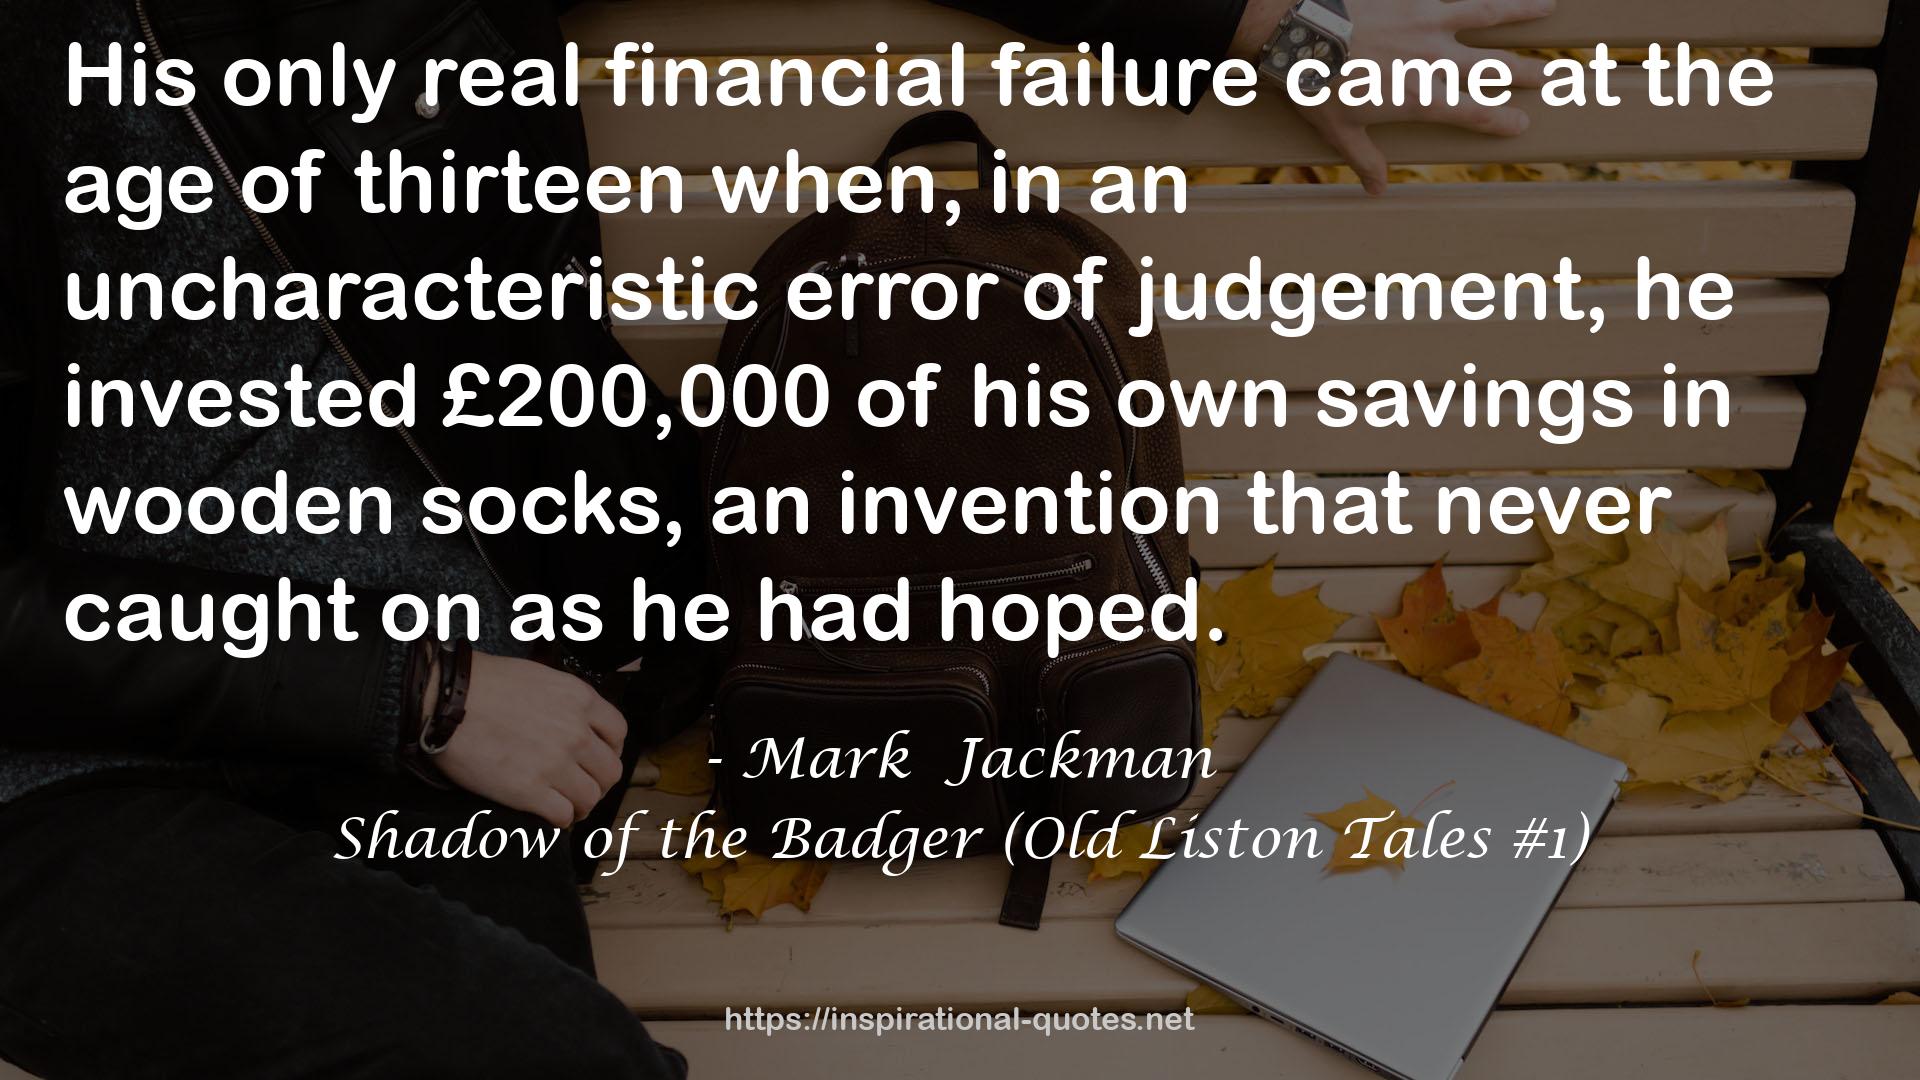 Shadow of the Badger (Old Liston Tales #1) QUOTES